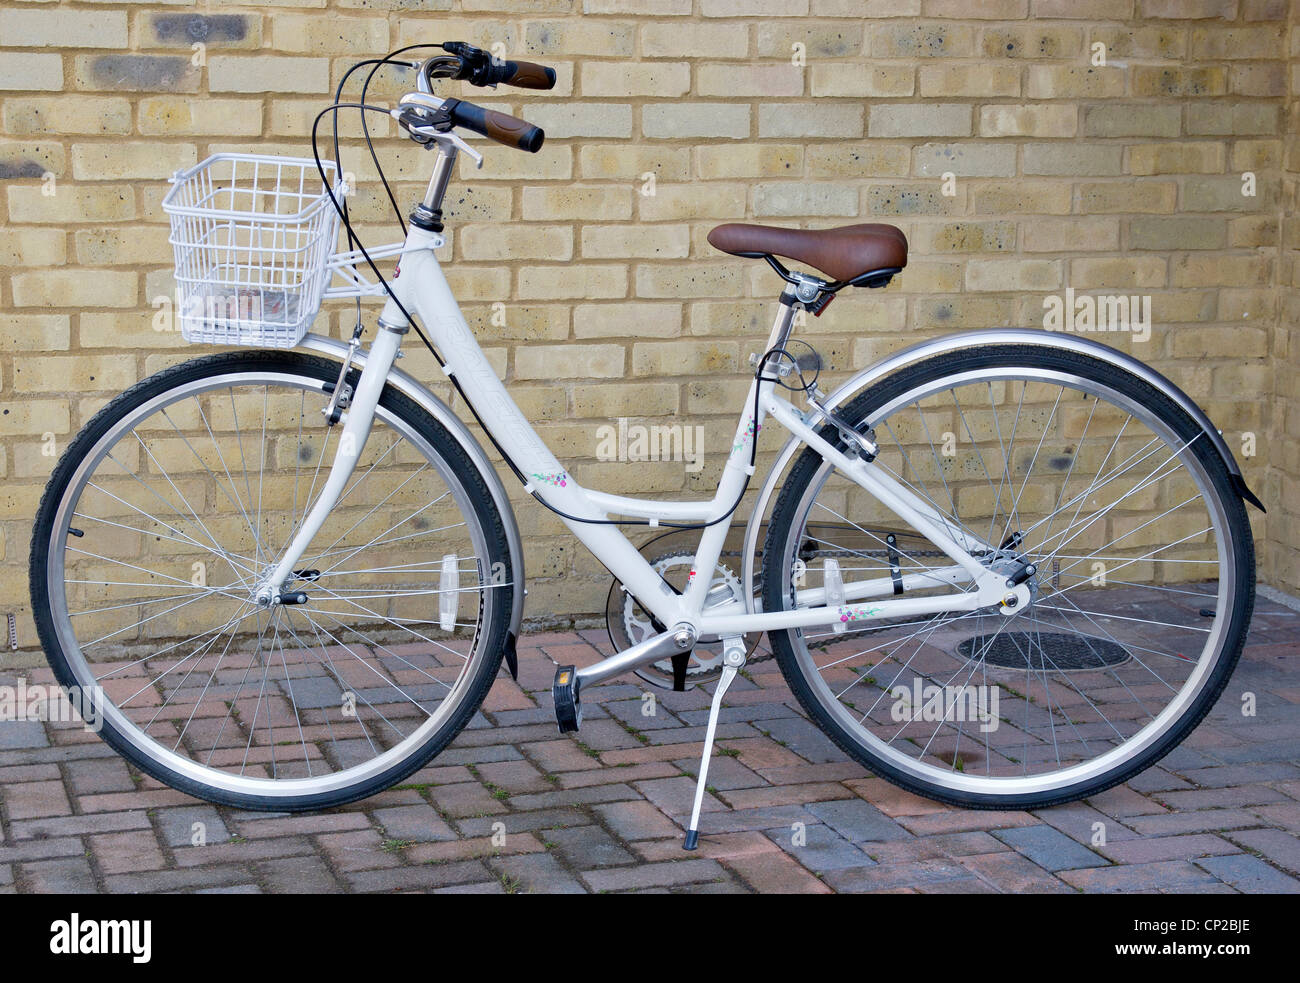 Ladies Bike Cycle Bicycle Raleigh Caprice Shopper Stock Photo